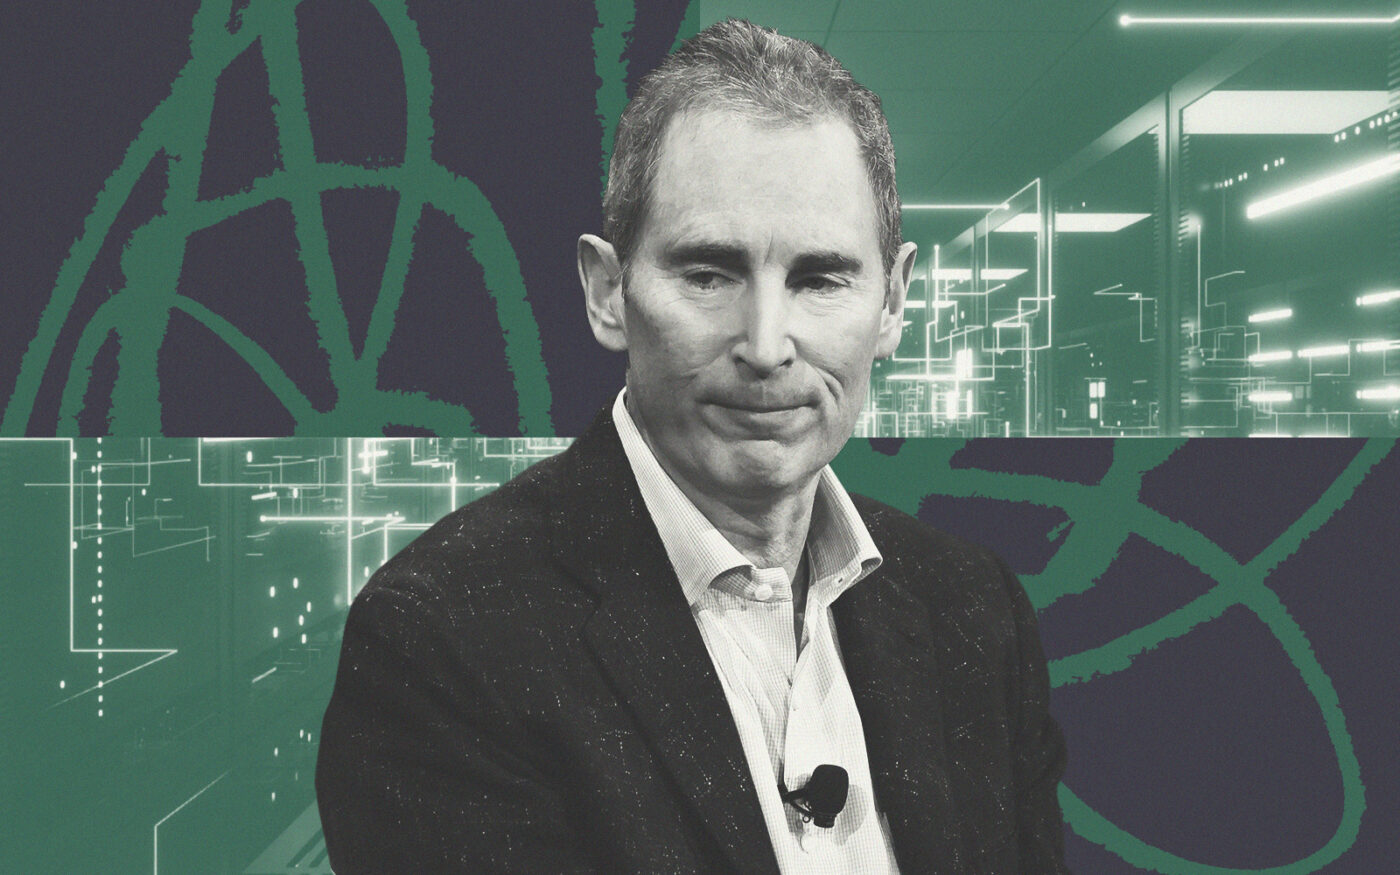 Amazon's Andy Jassy; data center; scribbles